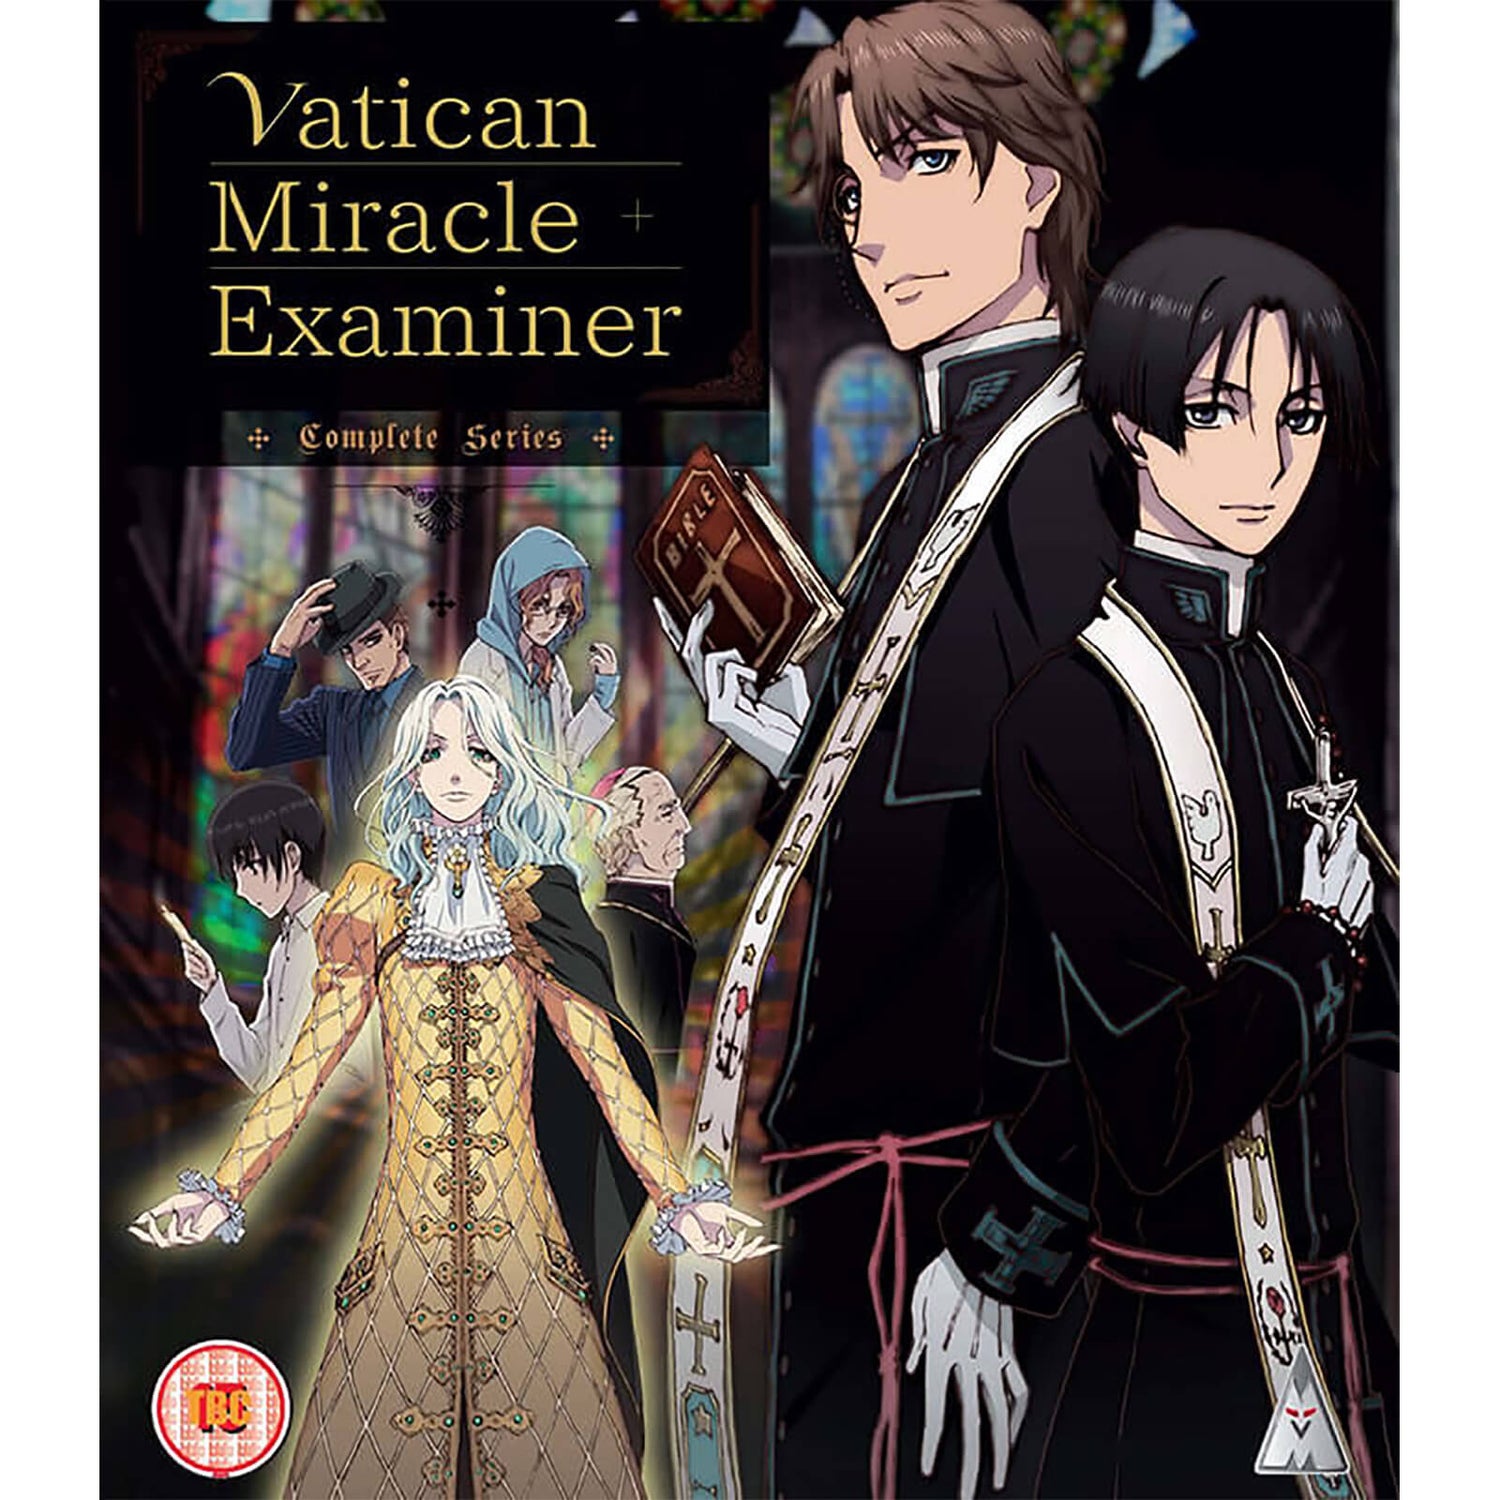 Vatican Miracle Examiner Collection